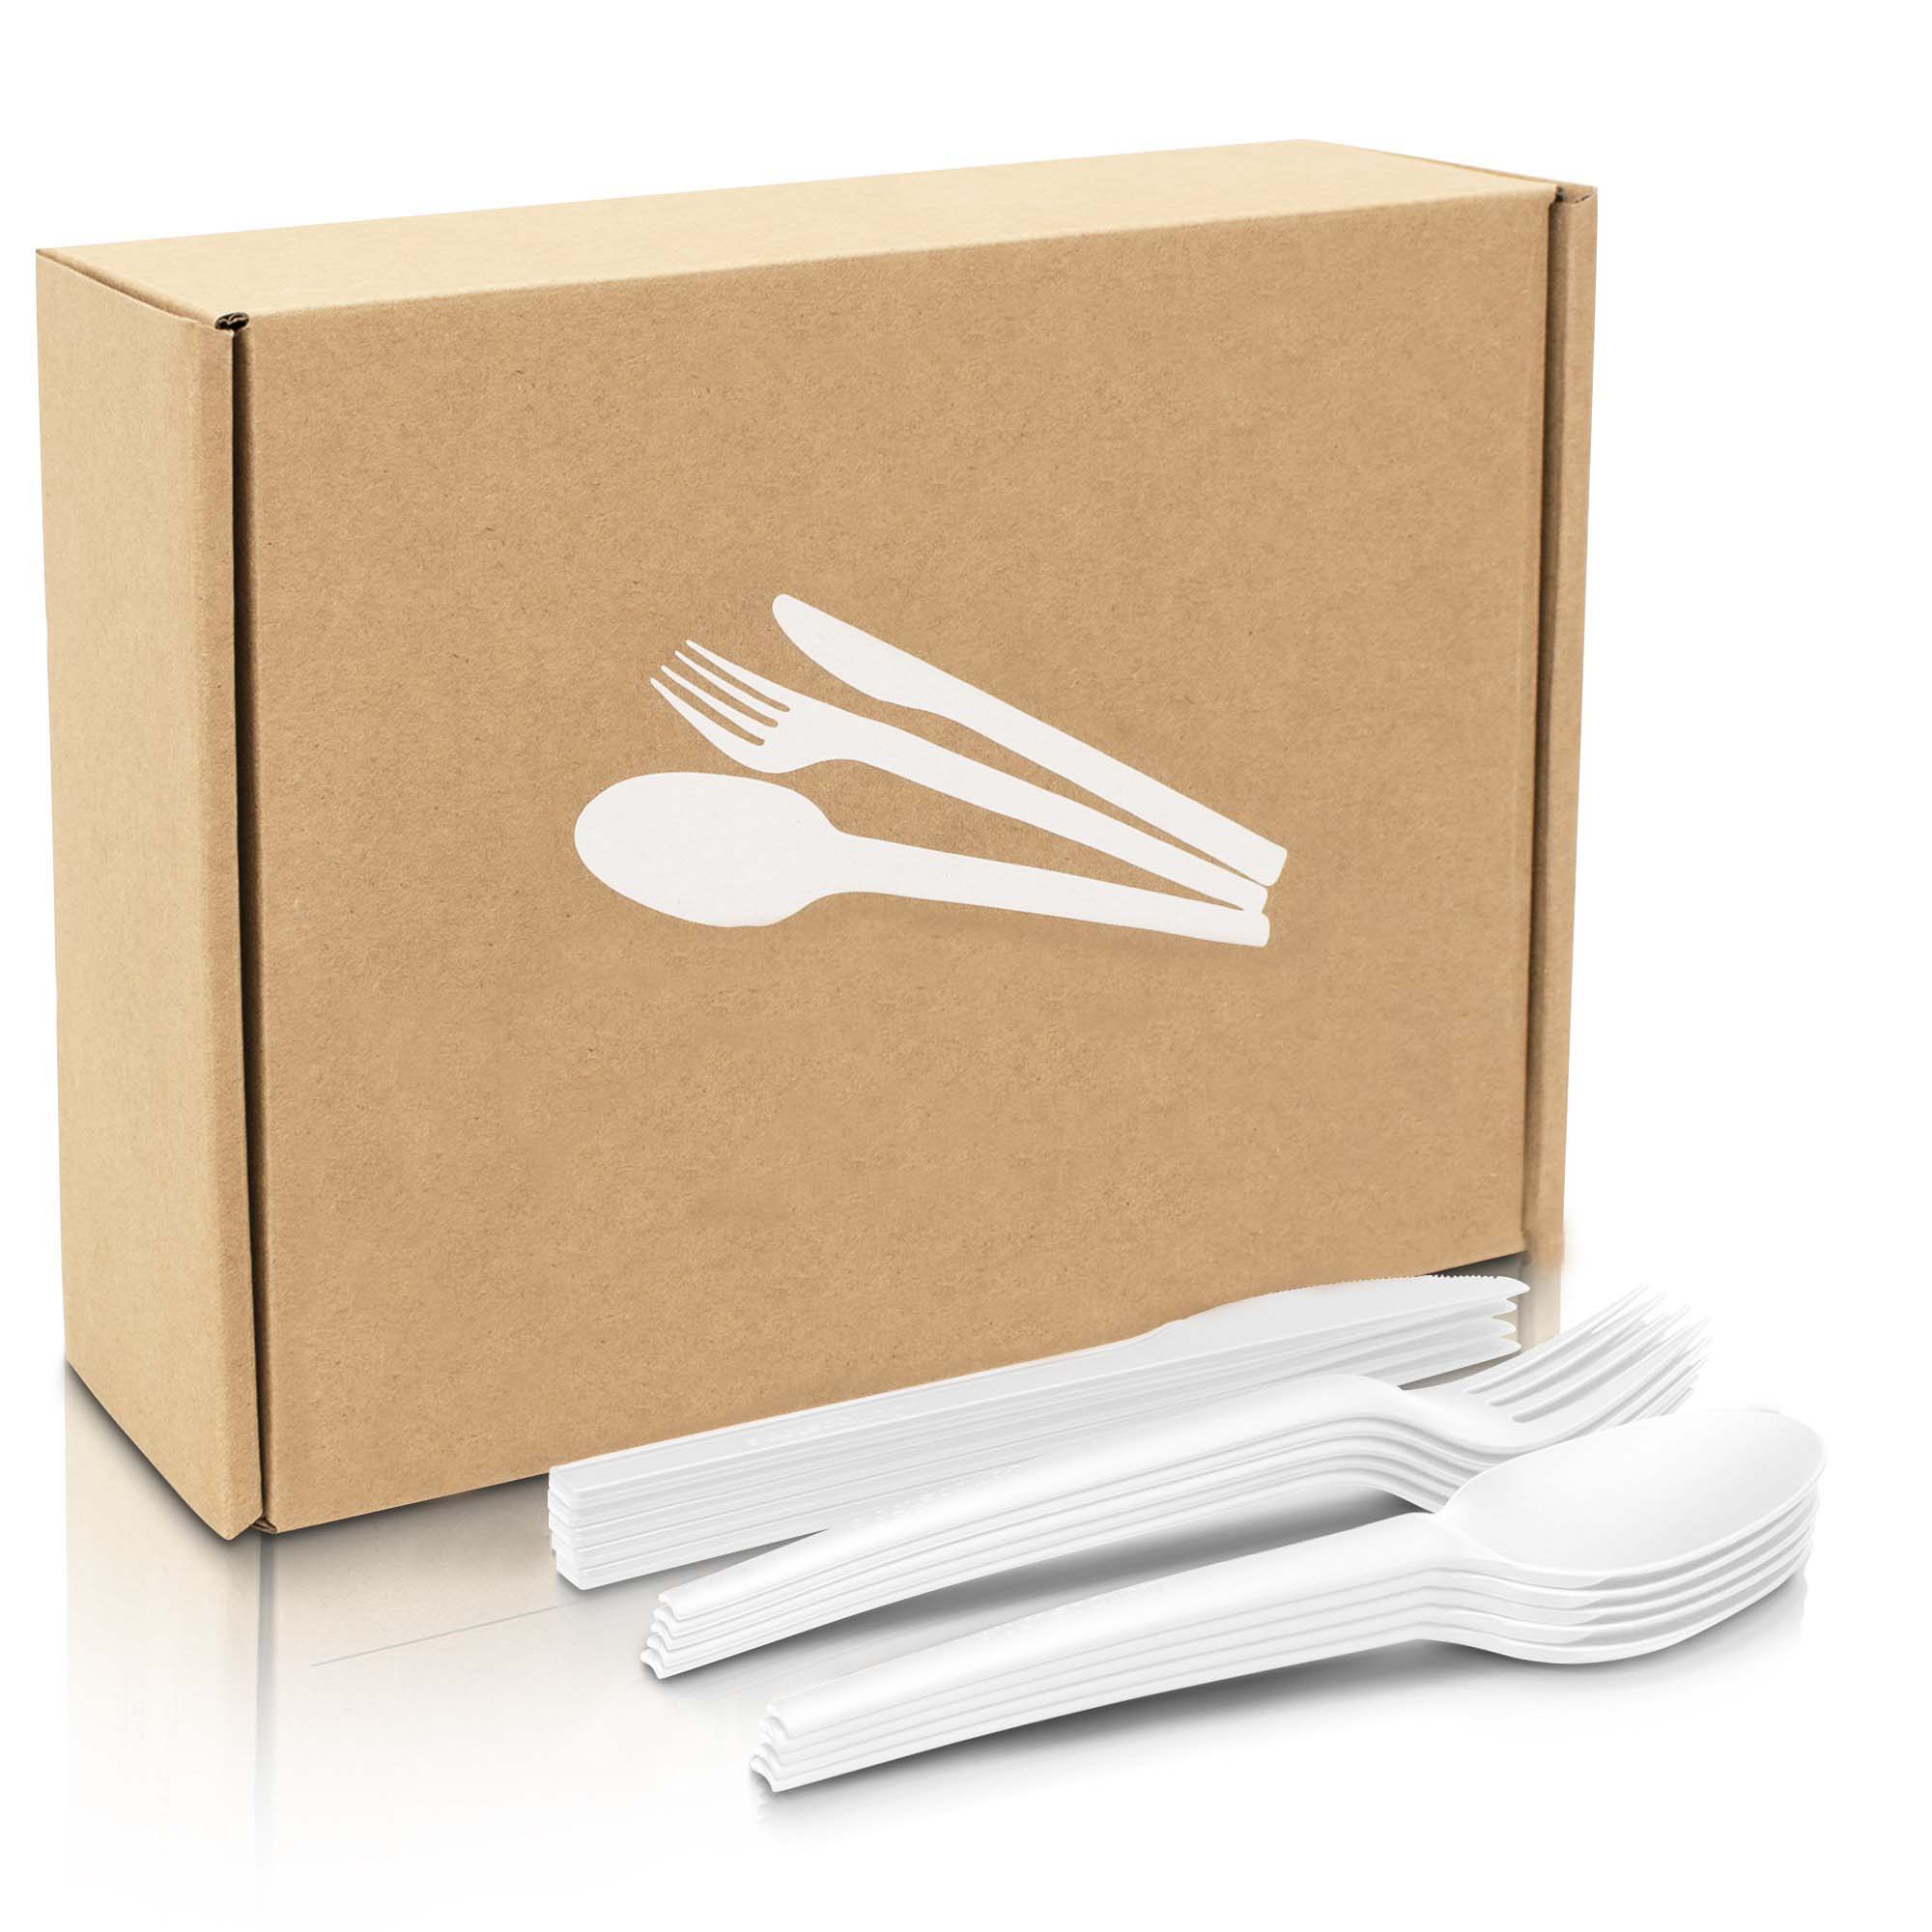 Quanhua 250 Pieces aircraft box biodegradable kitchen utensil Set 100 forks 100 knives 50 spoons compostable cutlery set